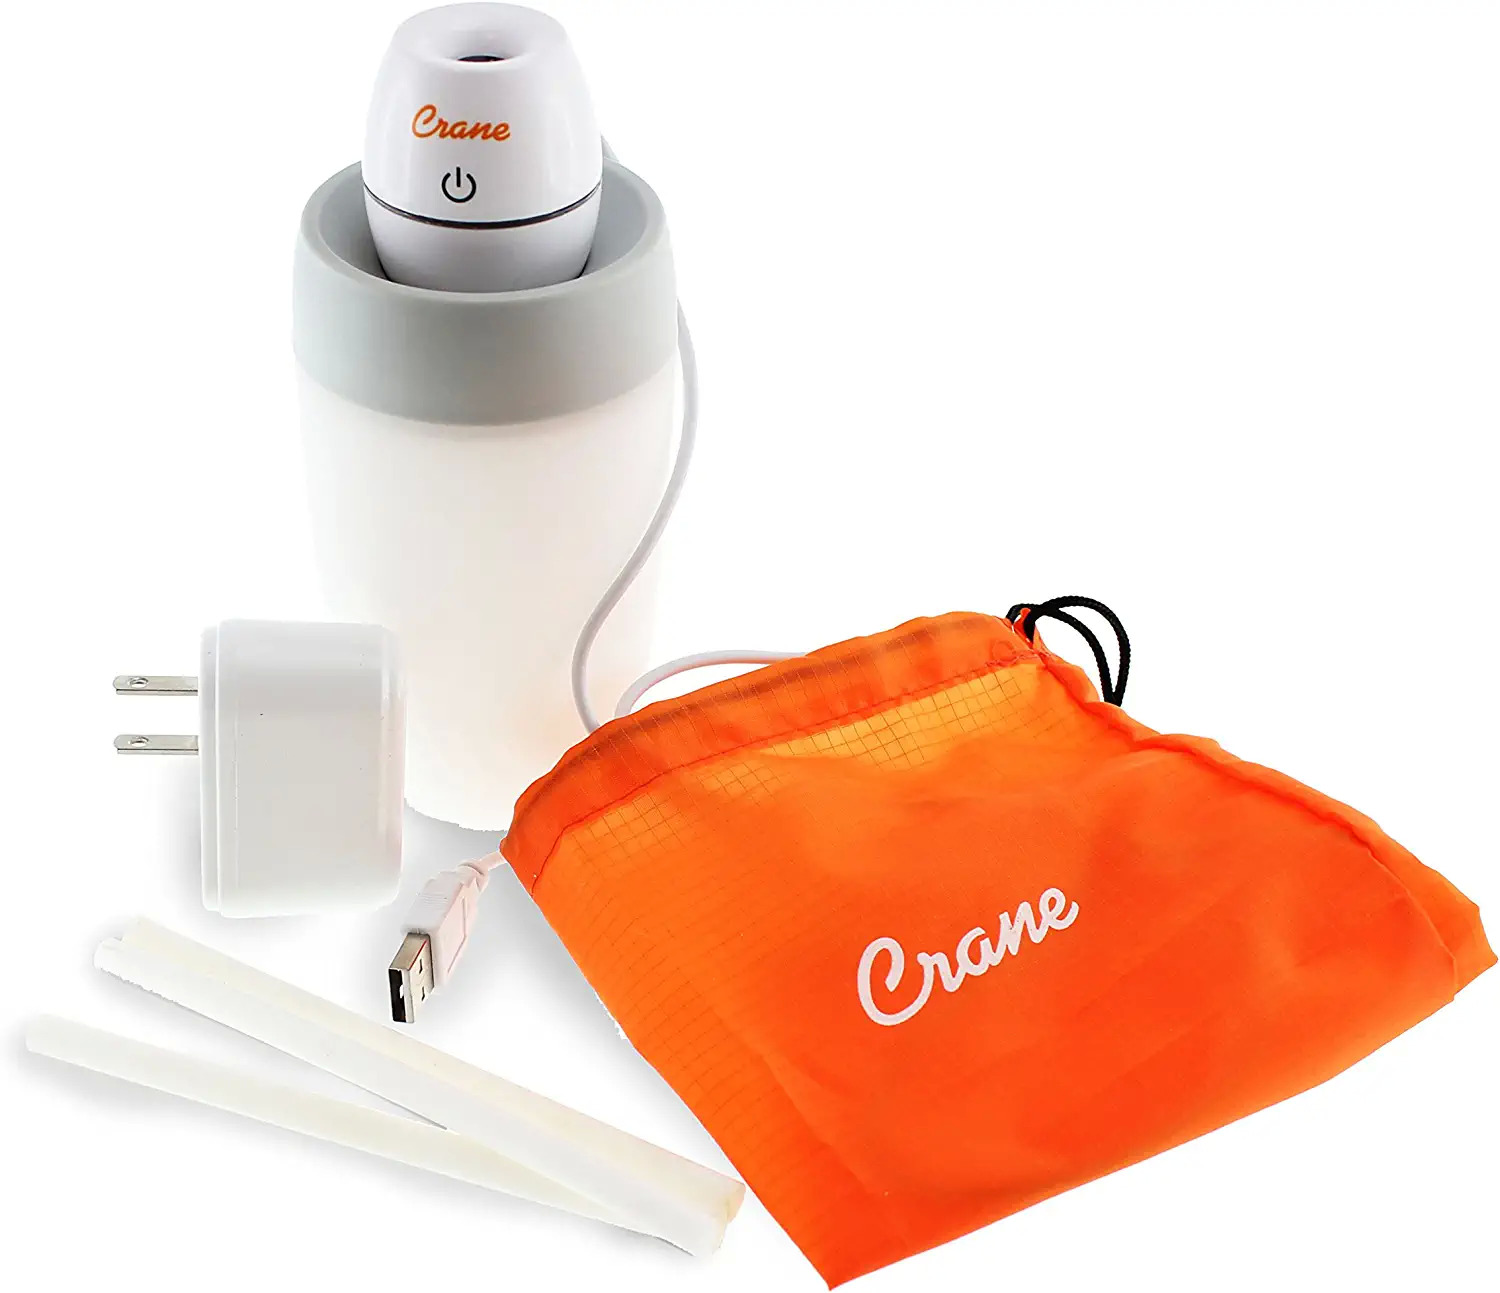 8-Ounce Crane USA Inc Travel Ultrasonic Cool Mist Humidifier (White) $9 + Free Shipping w/ Prime or on $25+